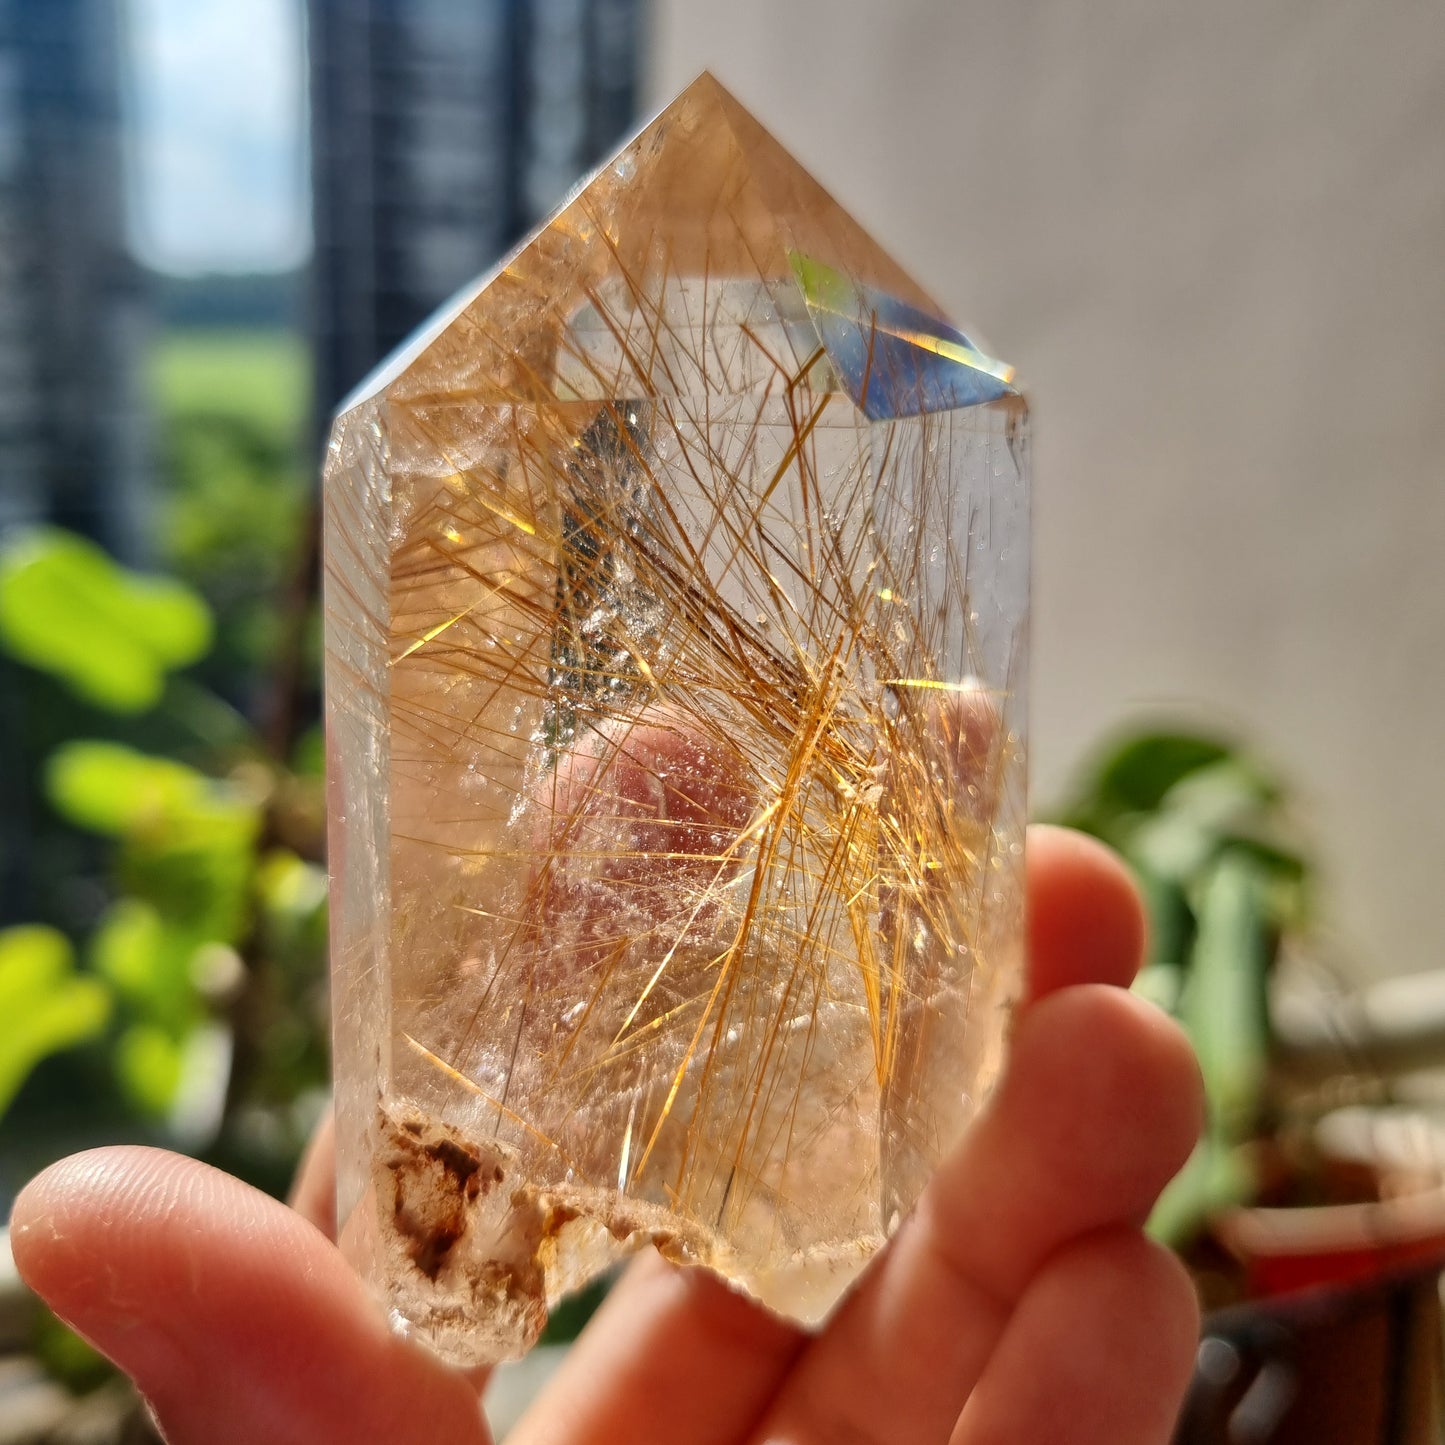 Gold Rutile in Quartz Polished Tower